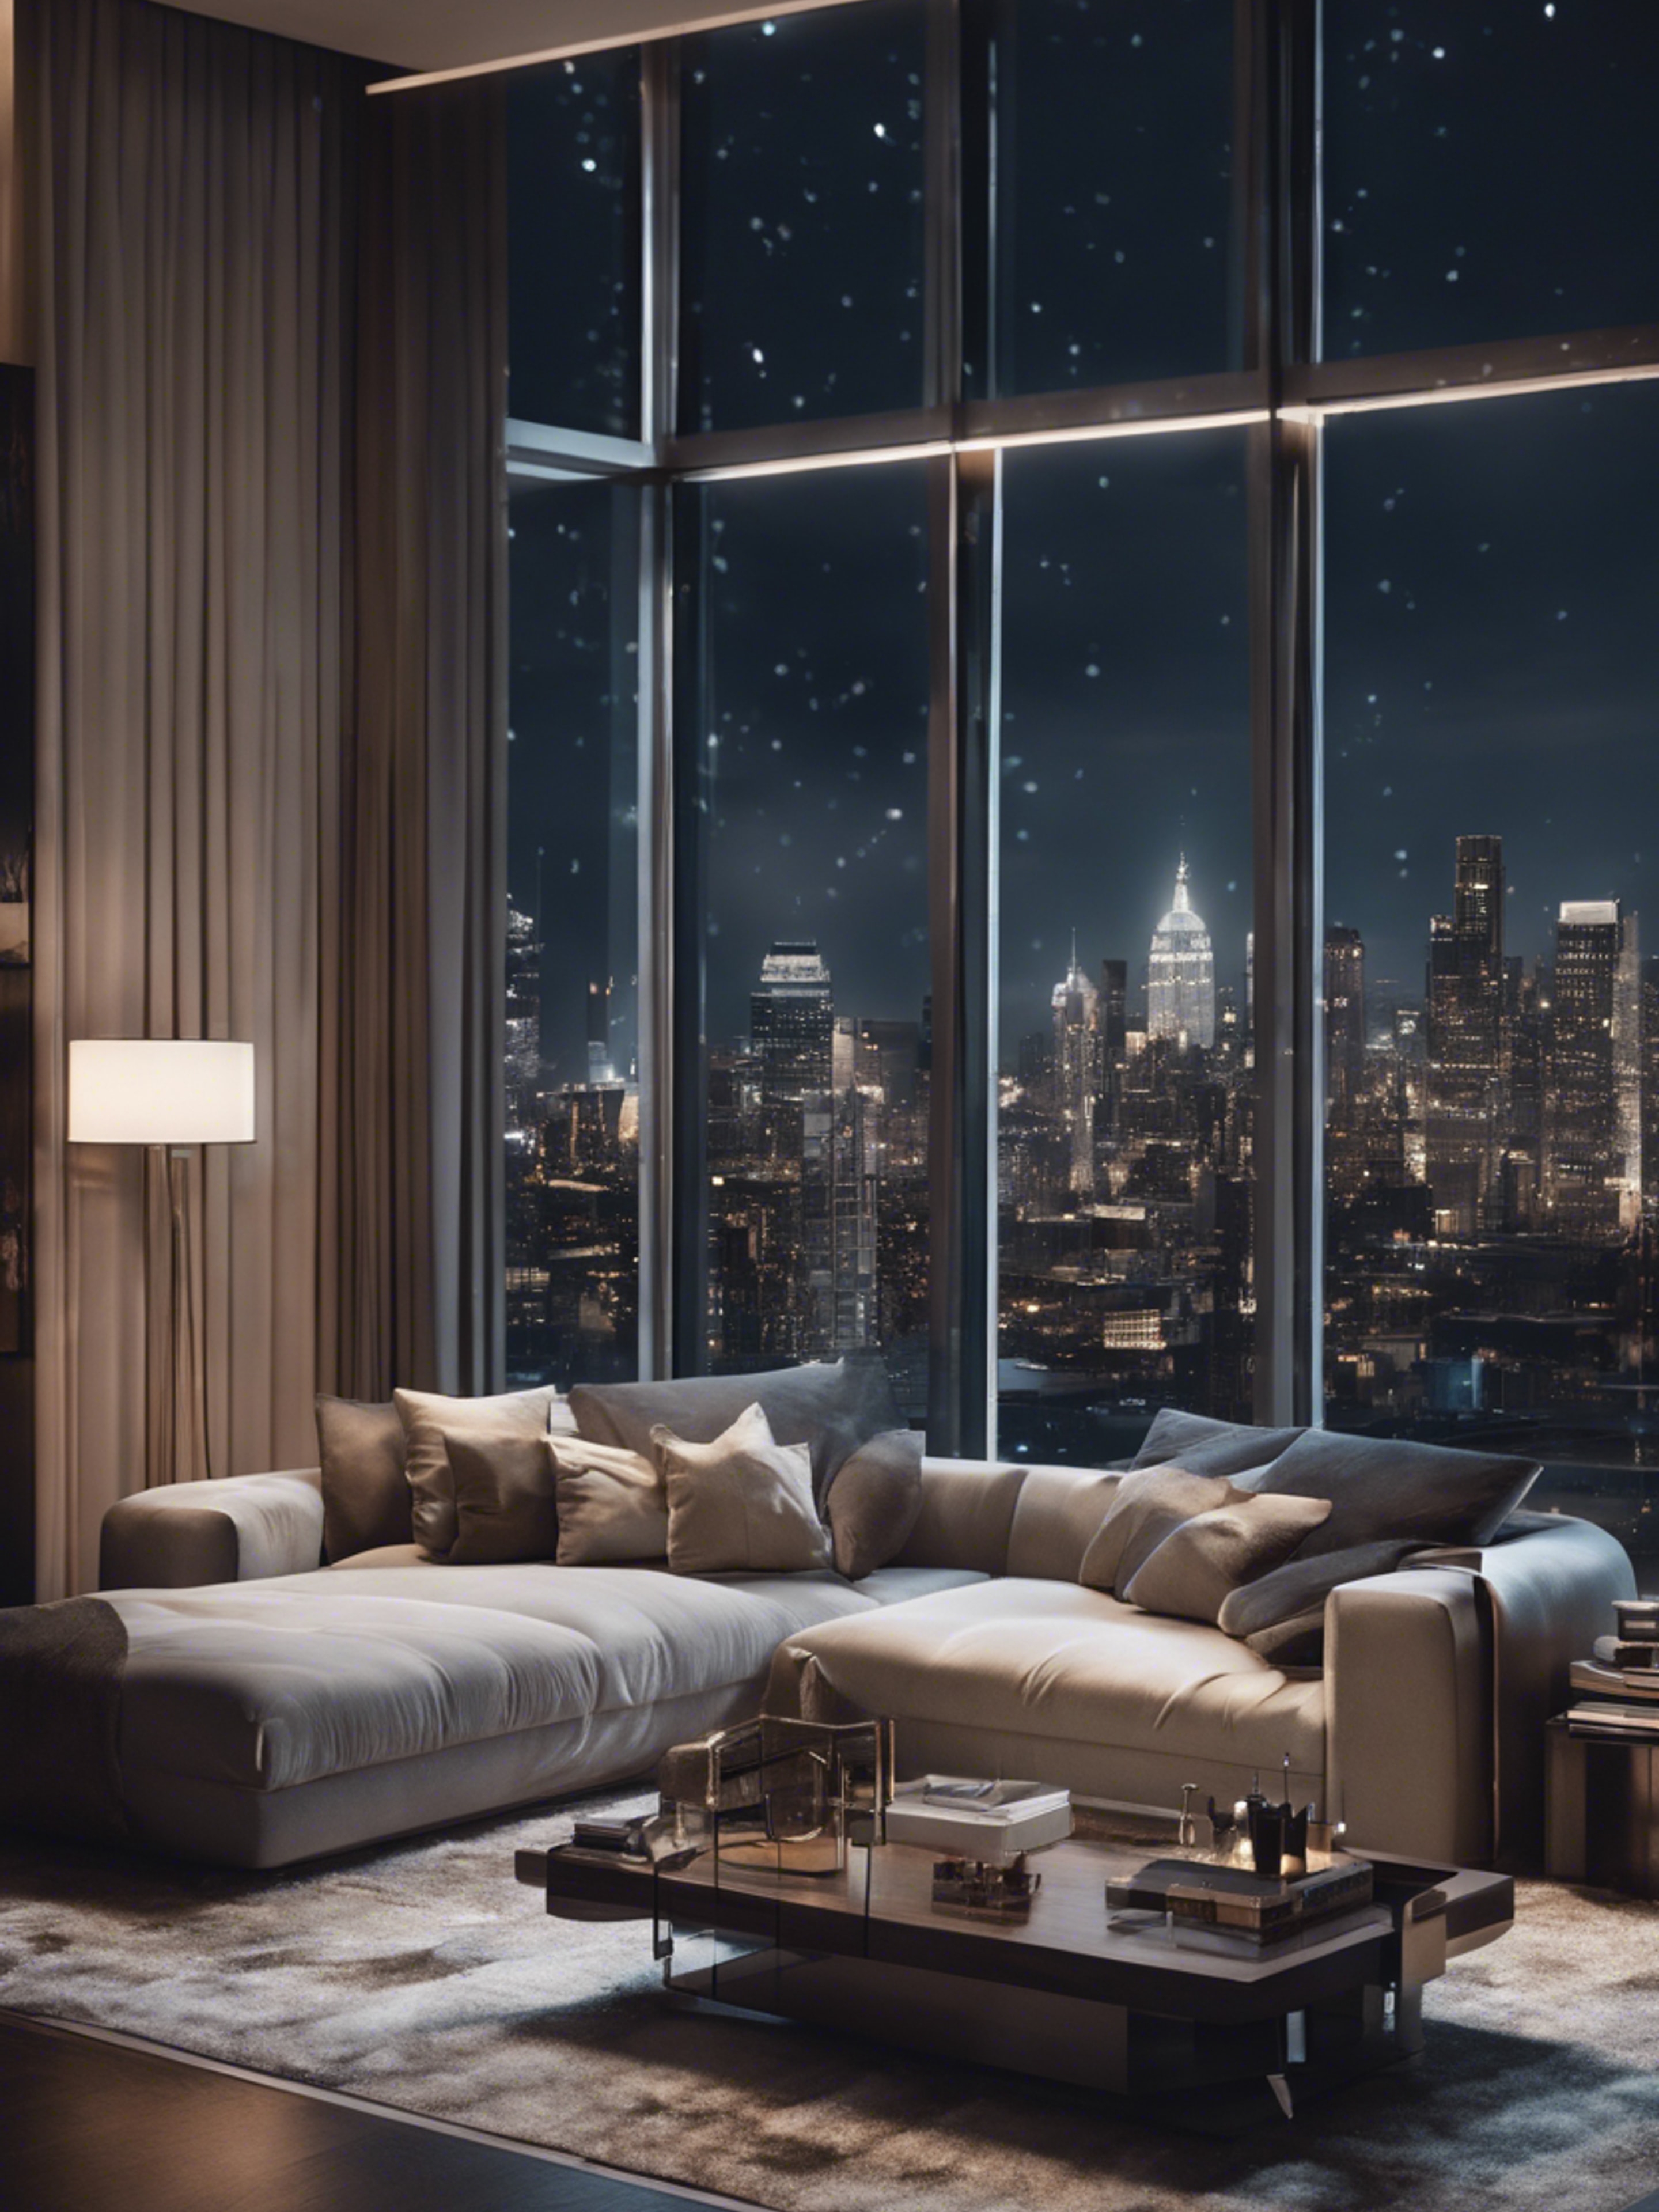 An ultra modern penthouse living room with floor-to-ceiling windows overlooking a night cityscape, adorned with stylish and minimalist decor. Tapéta[32f92be3d45a43a5bc6a]